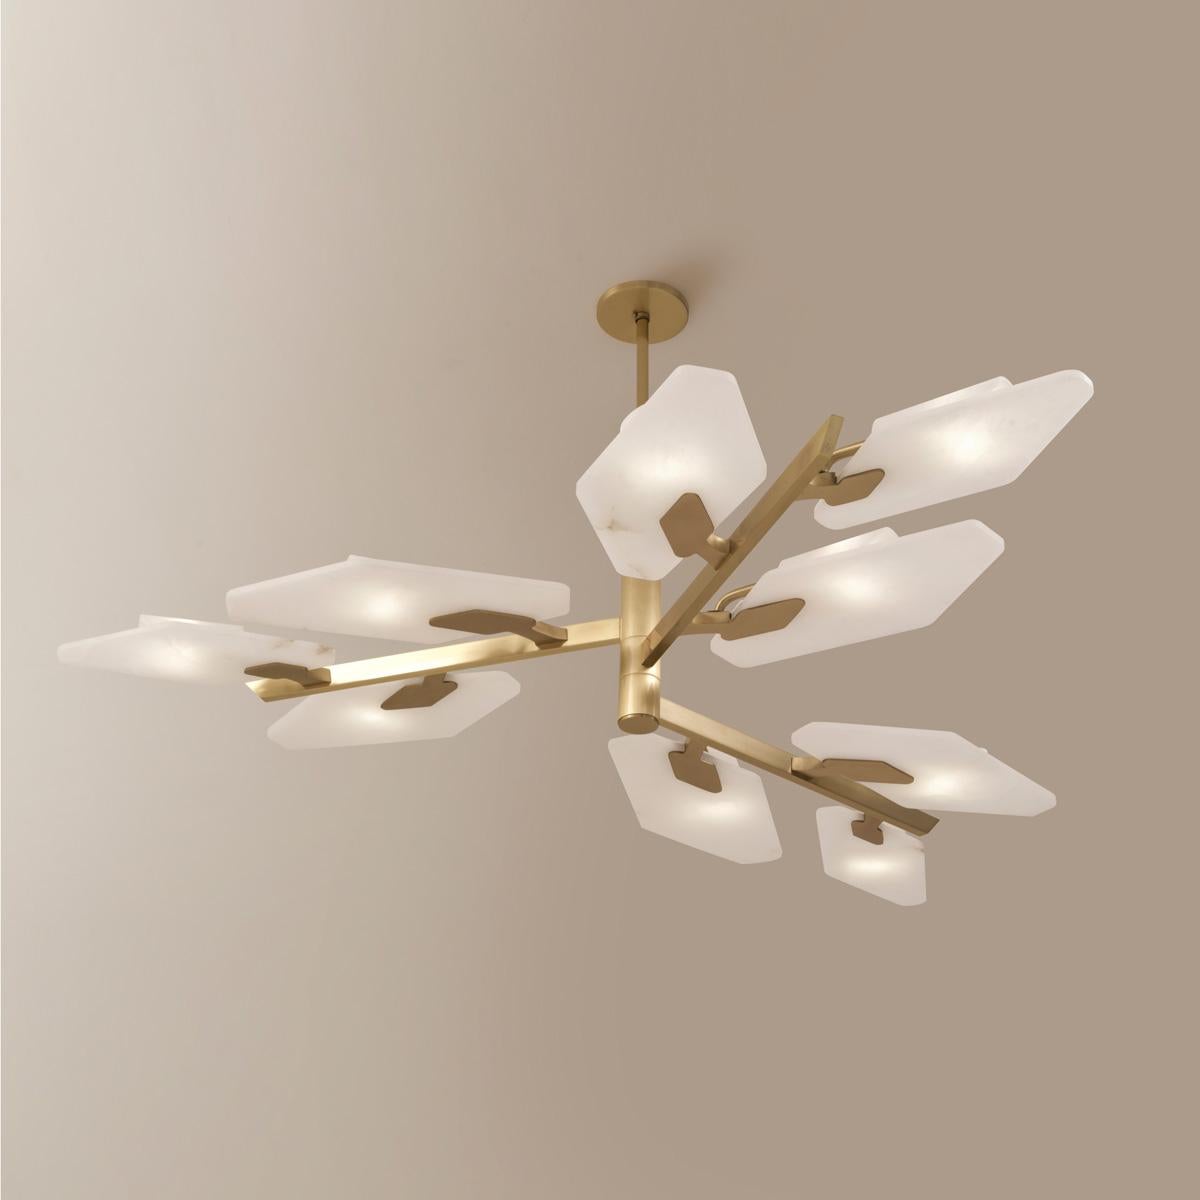 Italian Leaf Ceiling Light by Gaspare Asaro-Satin Brass Finish For Sale